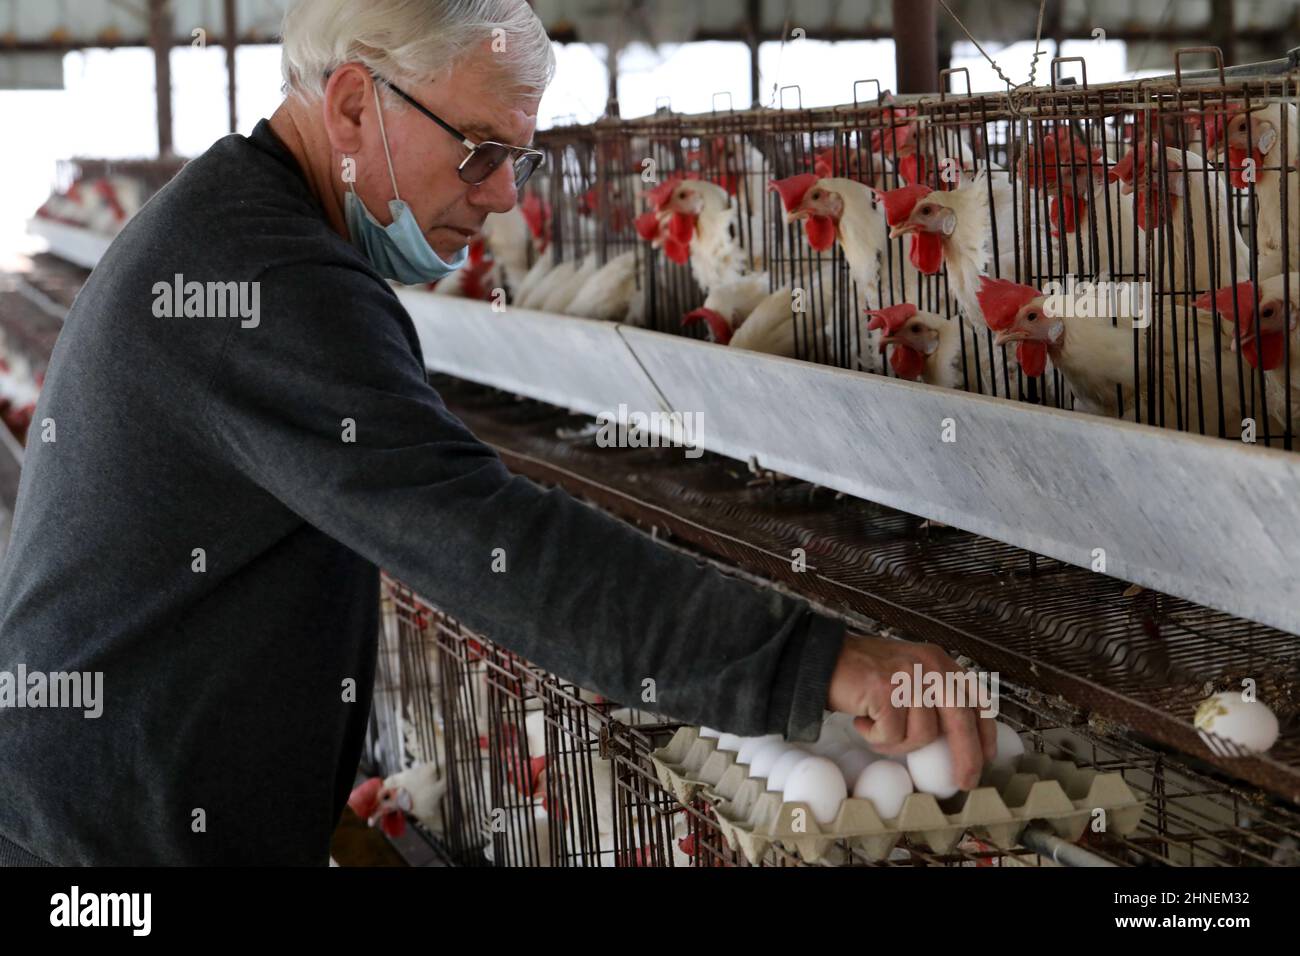 Kiryat Malakhi. 15th Feb, 2022. An Israeli agriculturist collects eggs from White Leghorn egg-laying chickens in cages in their hen house at Arugot village near Israeli city of Kiryat Malakhi on Feb. 15, 2022. Israel's Ministry of Agriculture and Rural Development on Monday announced new regulations regarding the use of hen cages in the egg industry. The regulations stipulate that from now on every new hen coop must be without cages, and from June 2029, any use of cage coops in the country will be banned. Credit: Gil Cohen Magen/Xinhua/Alamy Live News Stock Photo